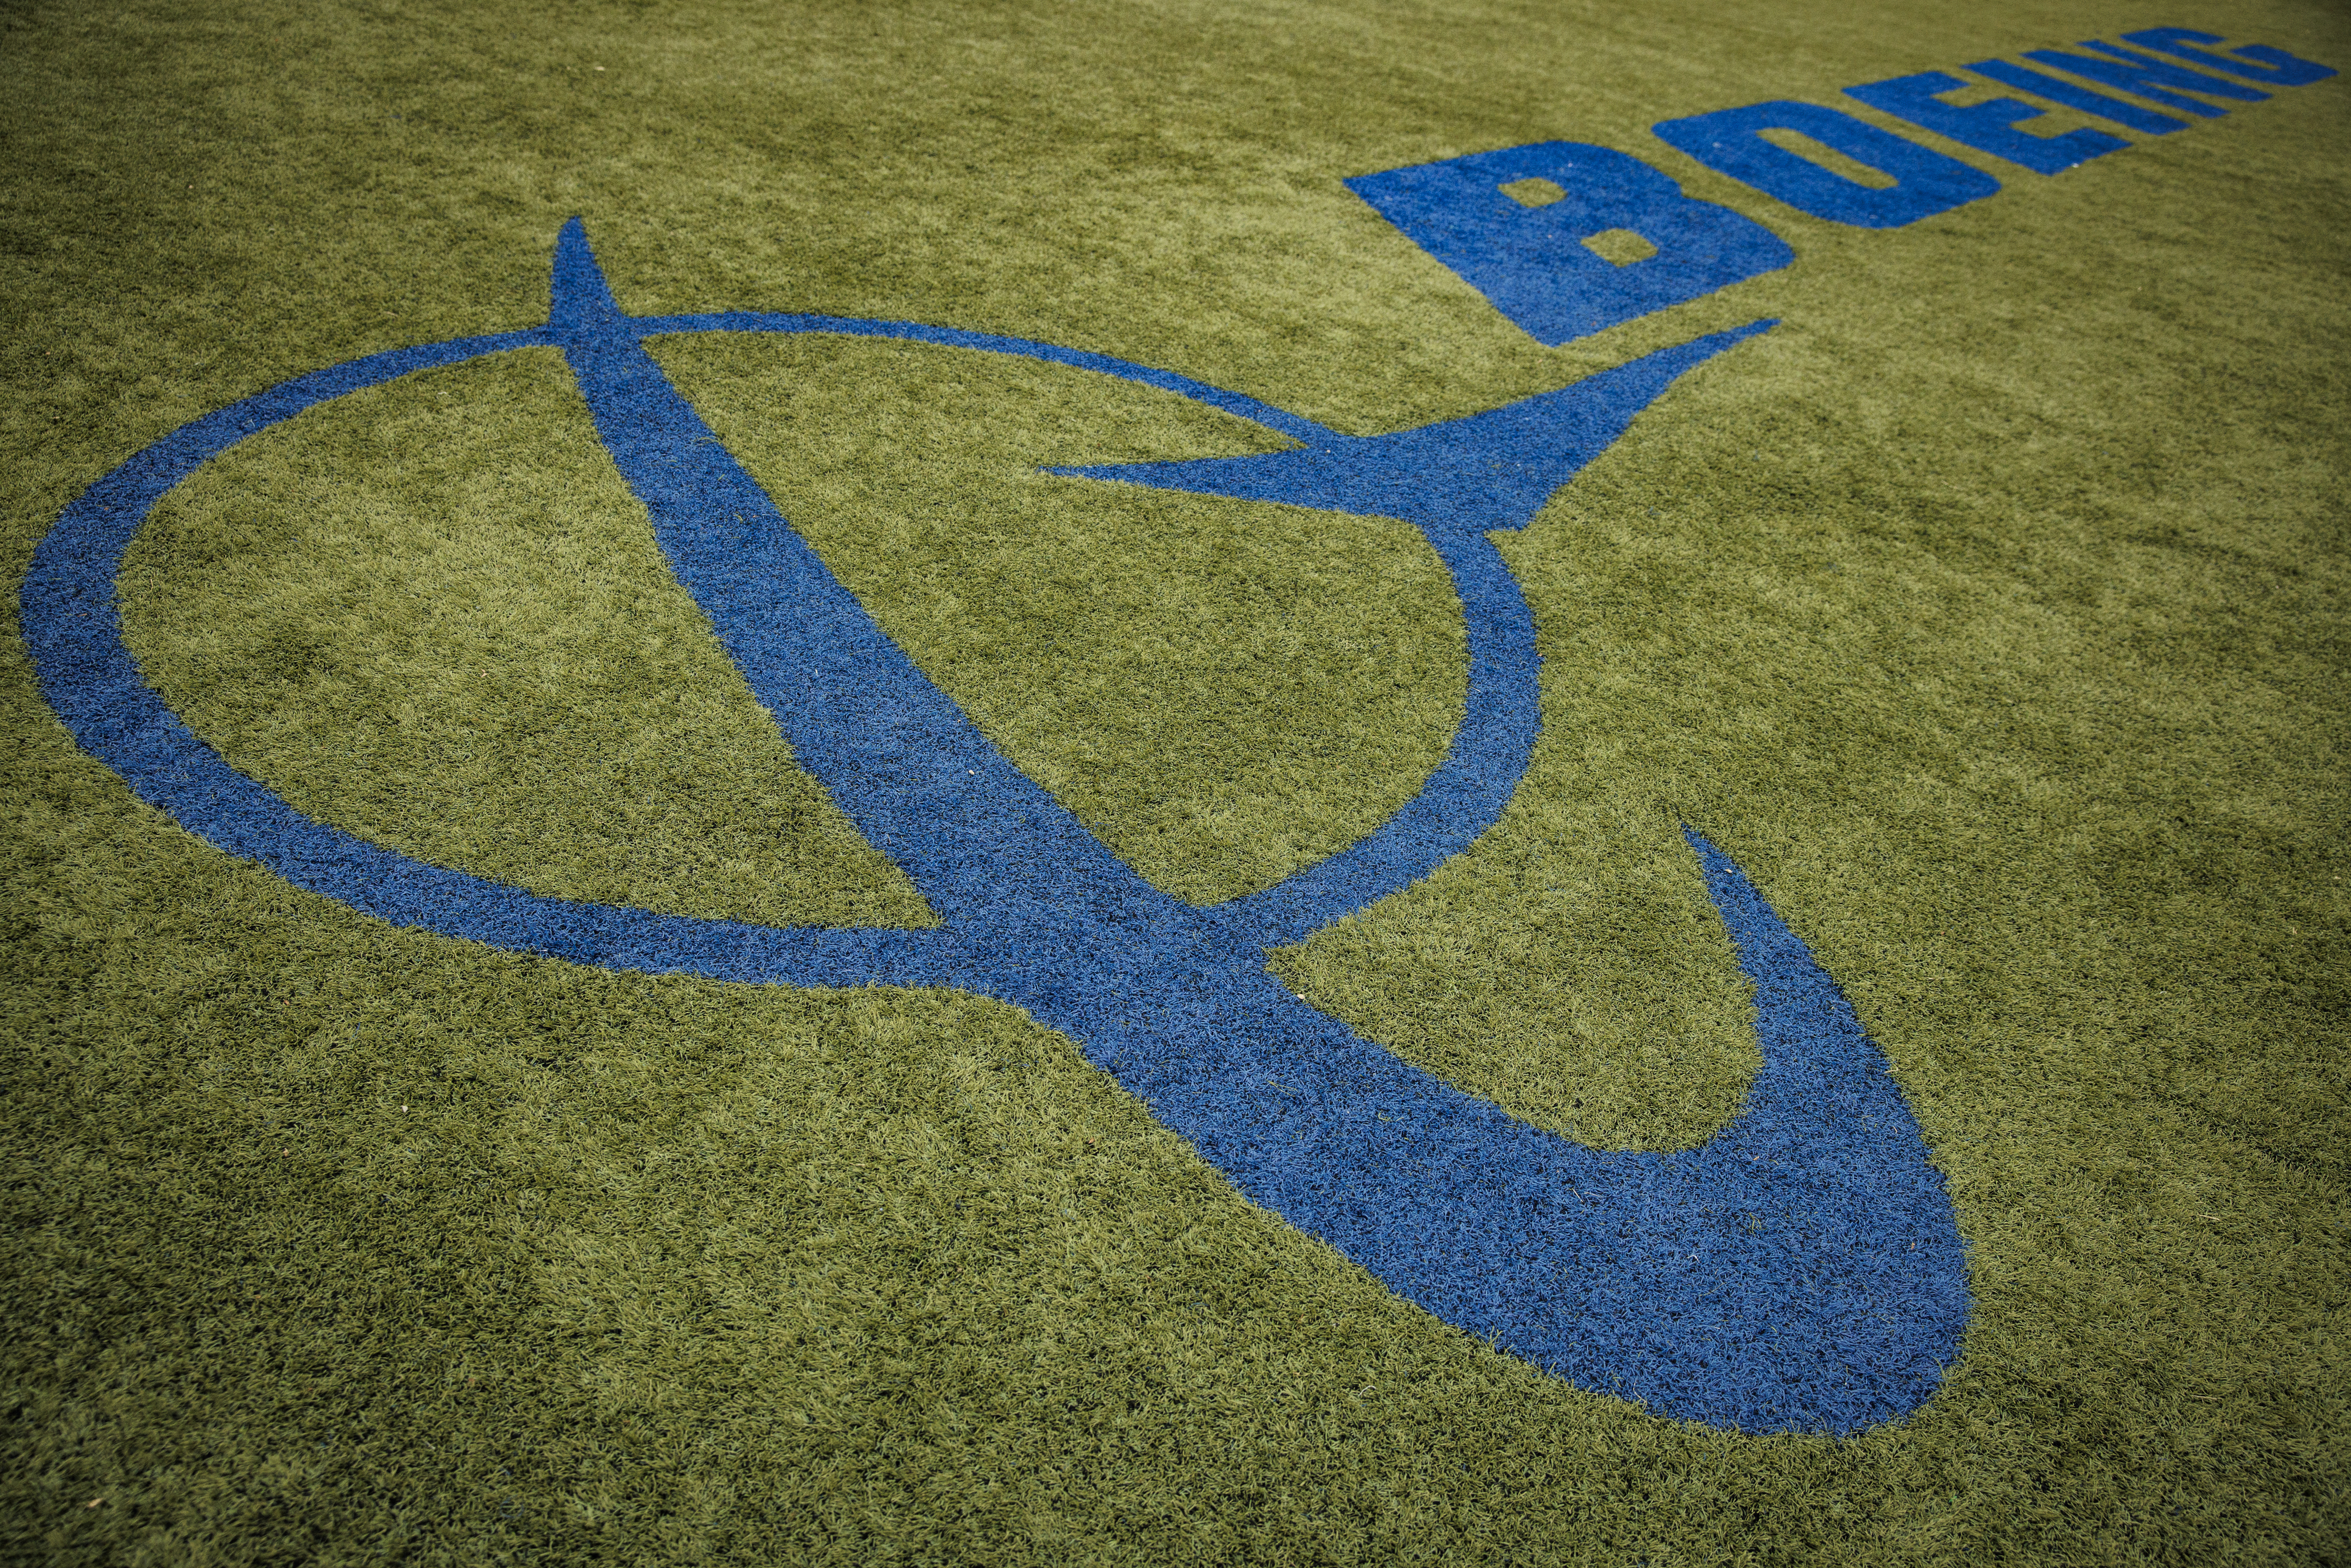 Boeing logo painted on grassy surface